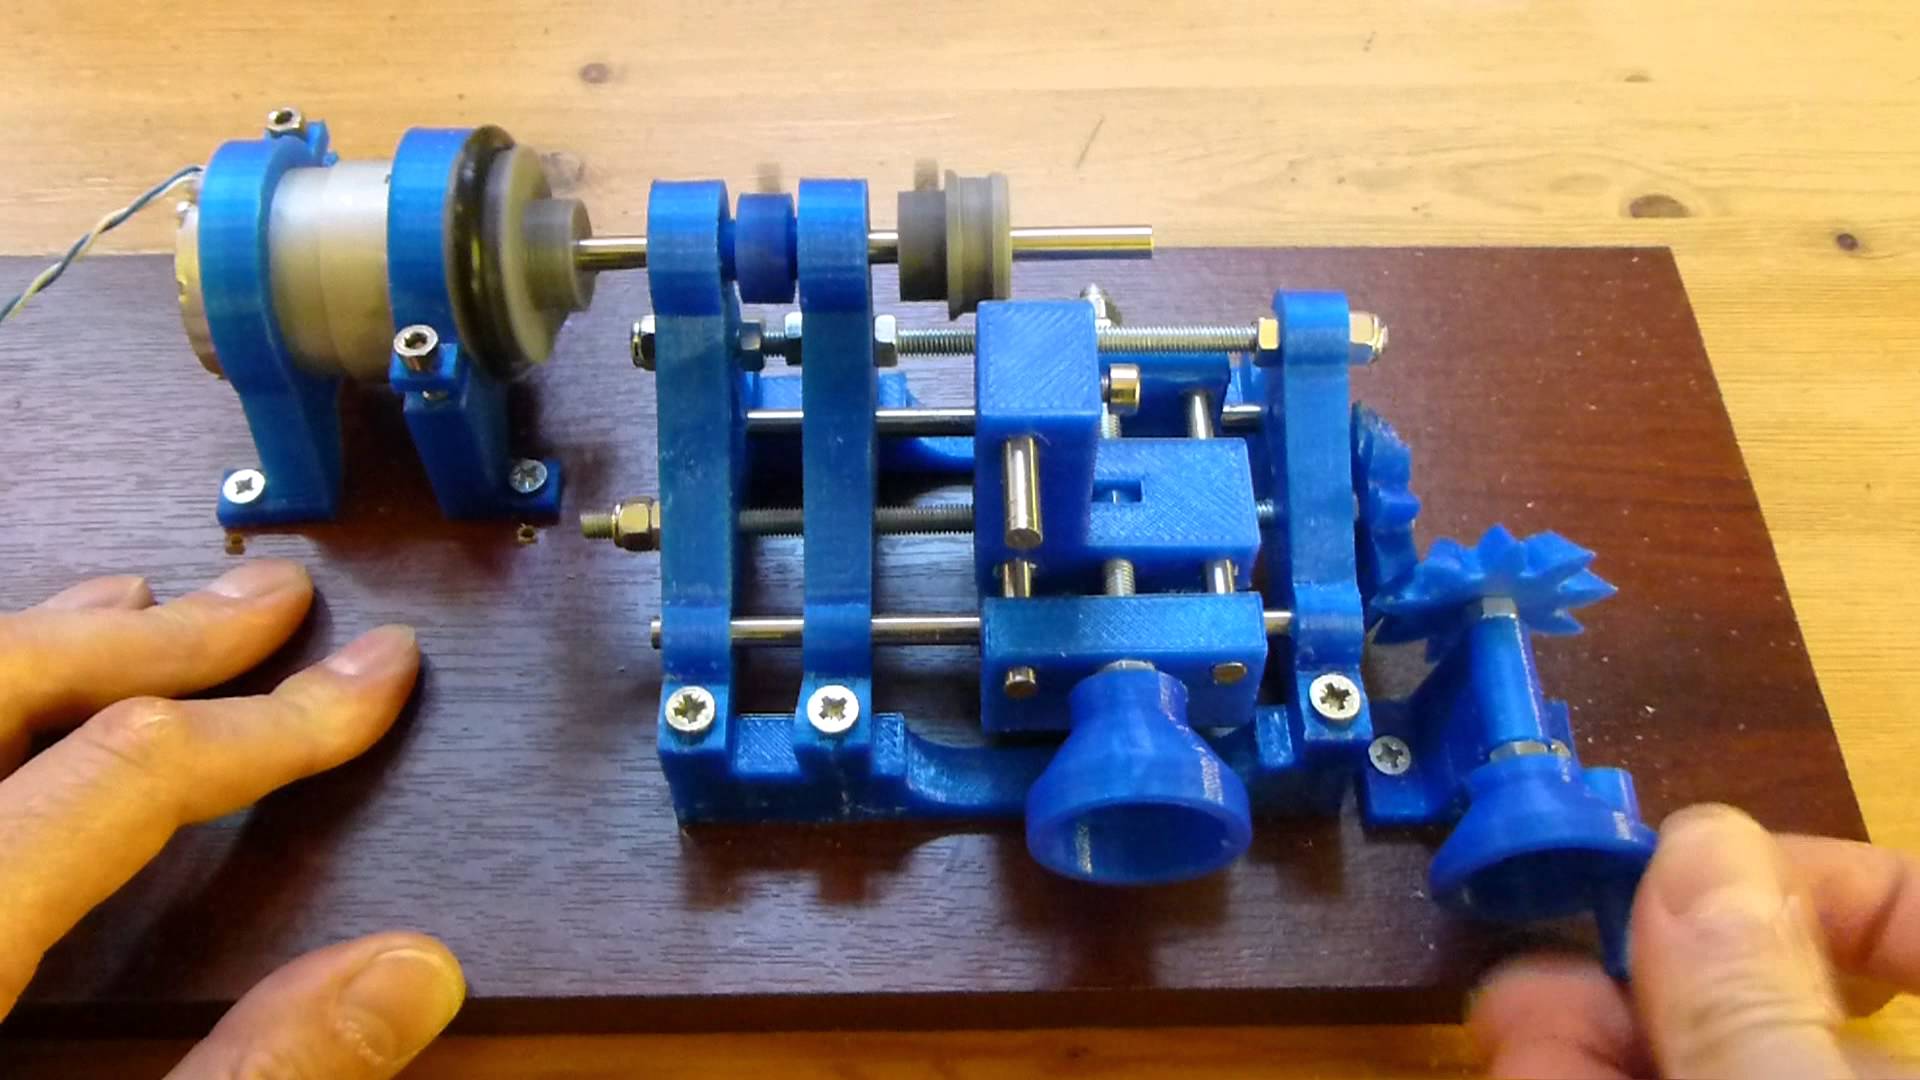 Printed lathe in operation